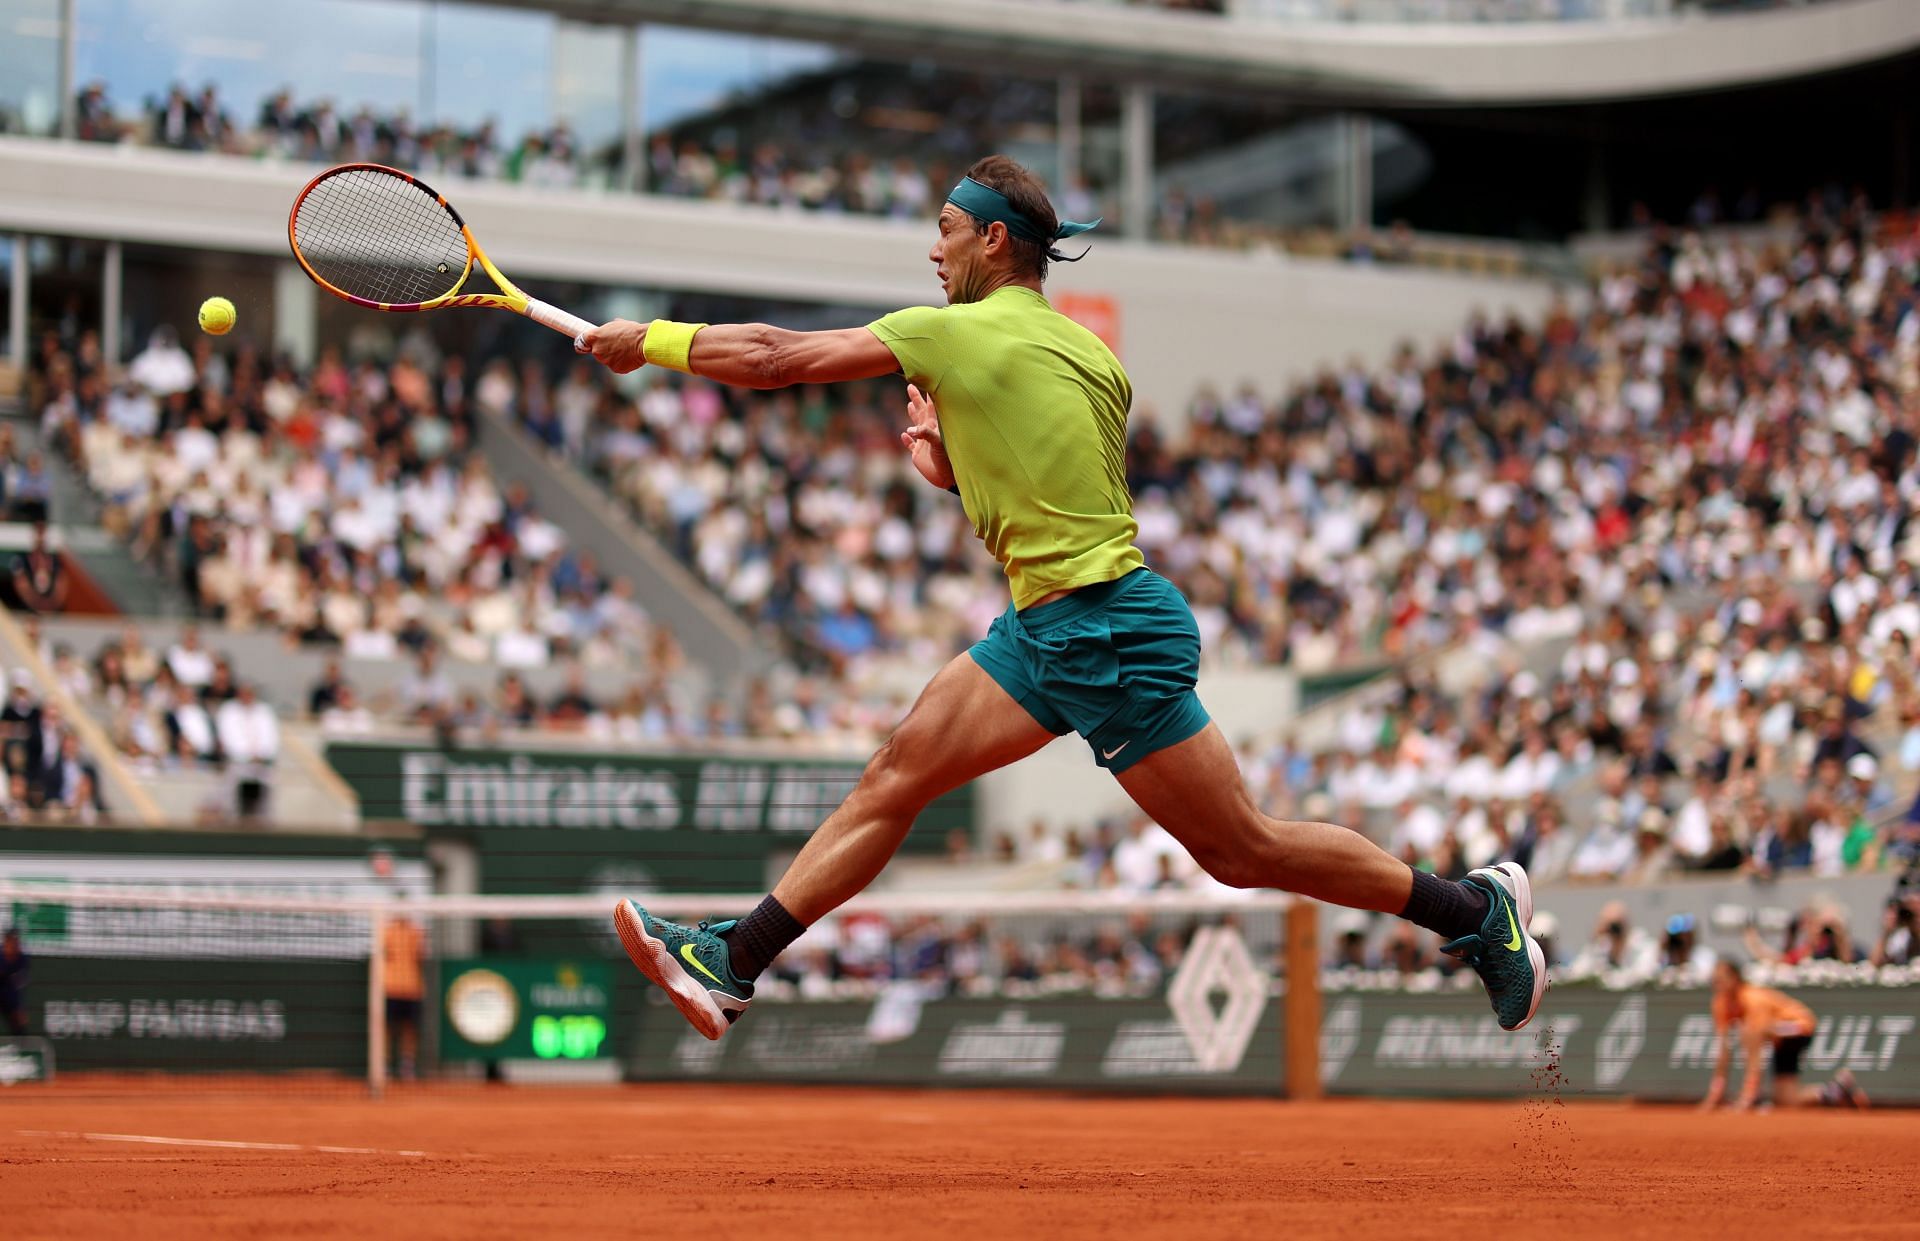 Rafael Nadal has said he will not use injections at Wimbledon